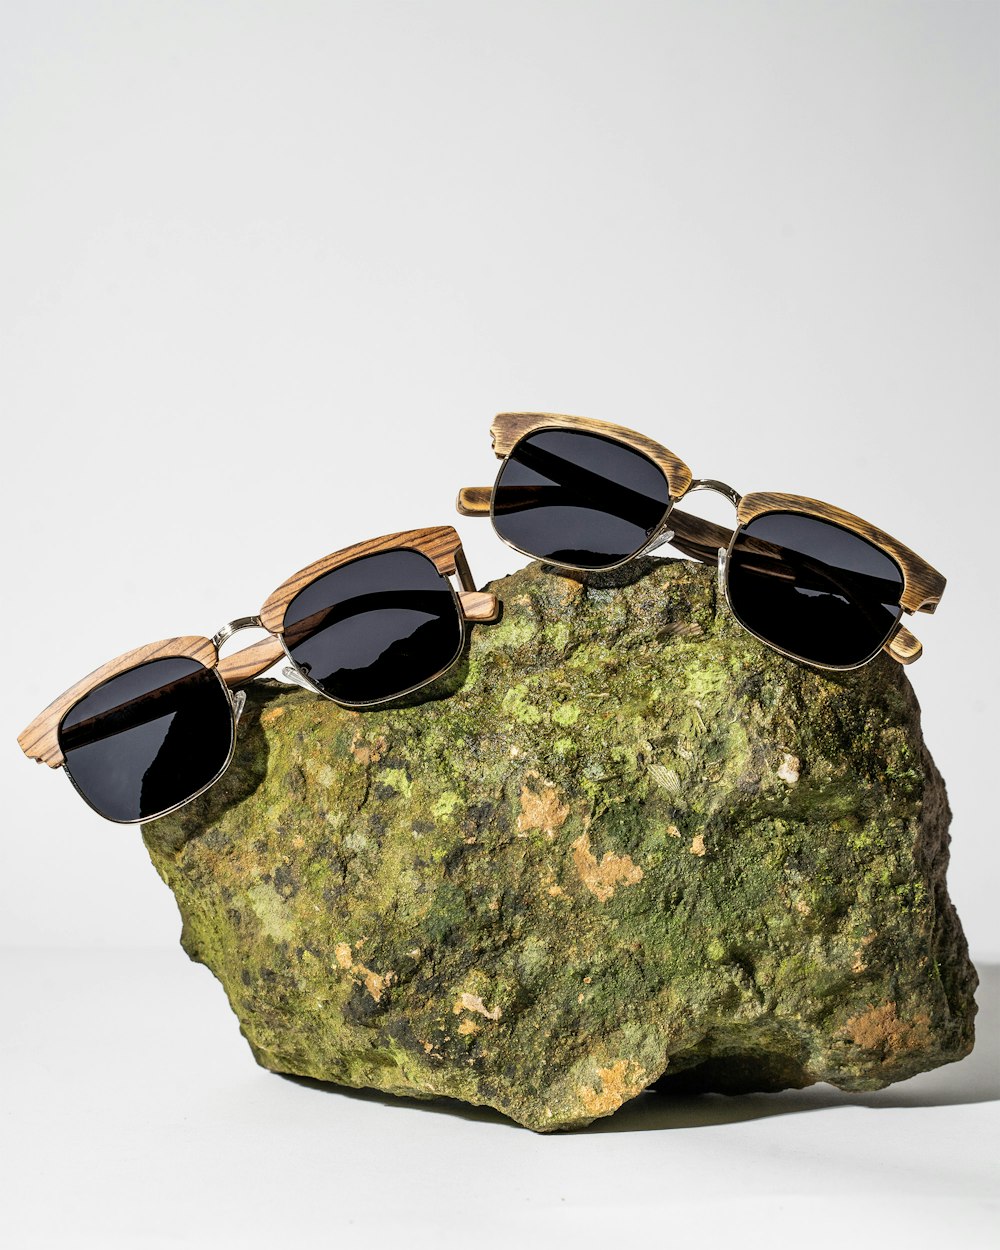 three pairs of sunglasses sitting on top of a rock